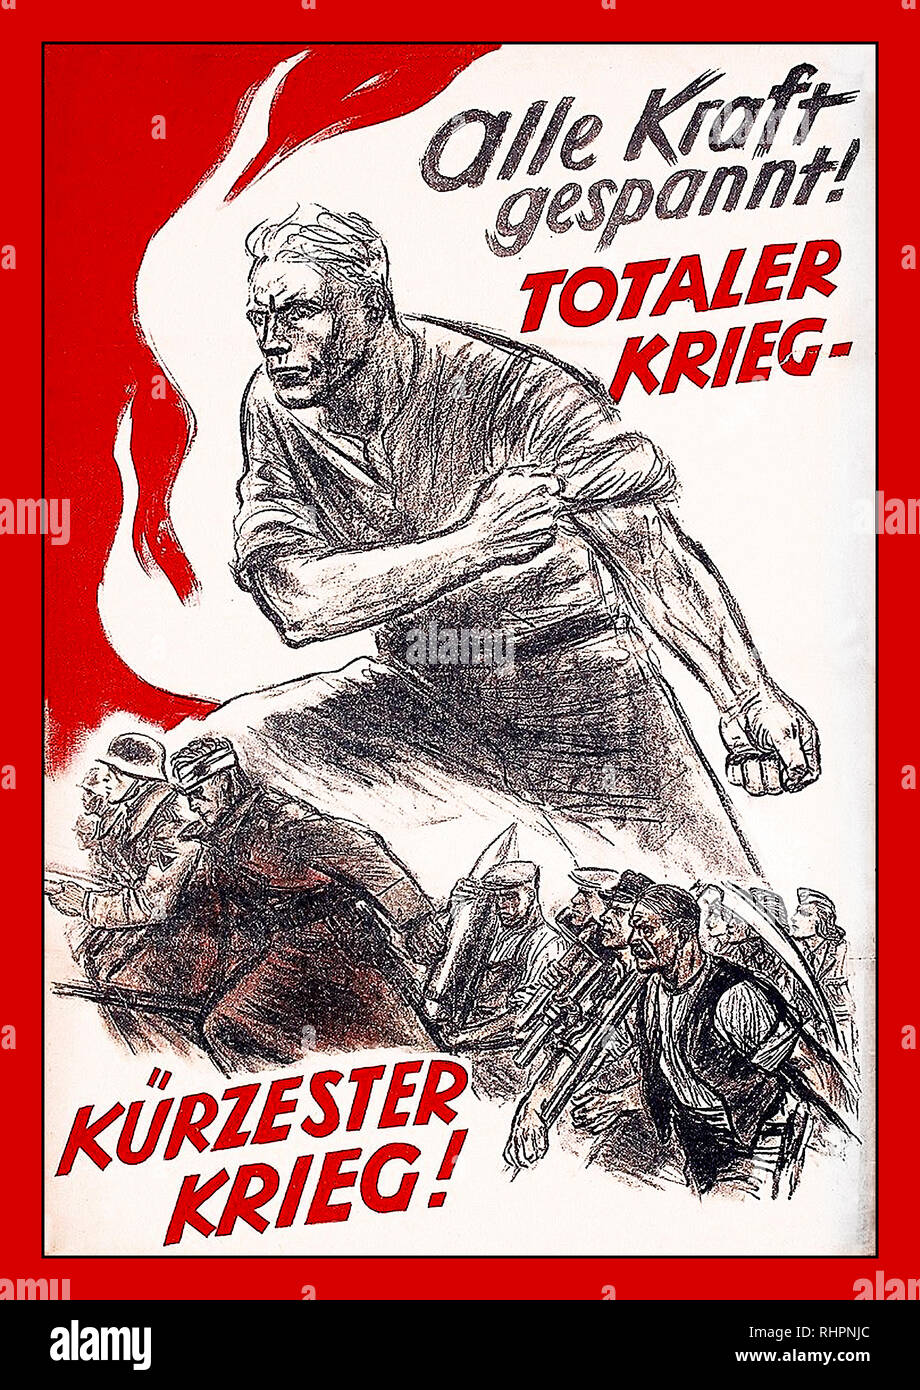 Vintage Propaganda Poster Nazi Germany from the years 1943-44. After the German army went on a series of setbacks in the war against the Soviets, Joseph Goebbels holds his famous speech in Berlin Sportpalast where he coined the term 'total war'.(TOTALER KRIEG) This meant an overall shift in society where industry focused entirely on war production, and enrolment in the military came to include more and more.This poster by Hans Schweitzer (pseudonym Mjölnir) calls the German people to concentrate their efforts to quickly win the war. Hans Schweitzer (Mjölnir) Stock Photo